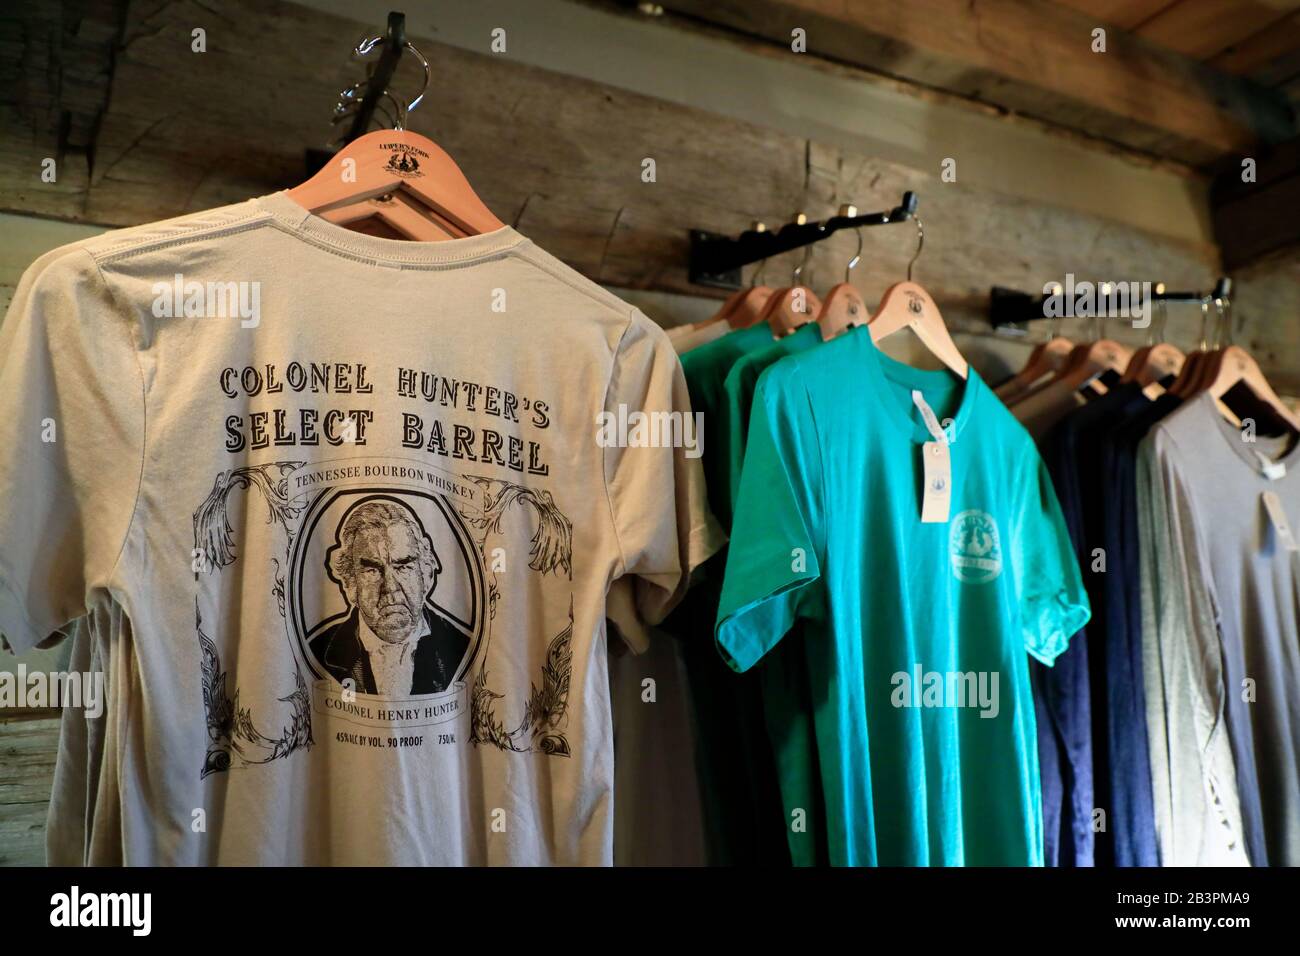 Souvenir t-shirts for sale in the gift shop of Leiper's Fork Distillery.Leiper's Fork.Tennessee.USA Stock Photo